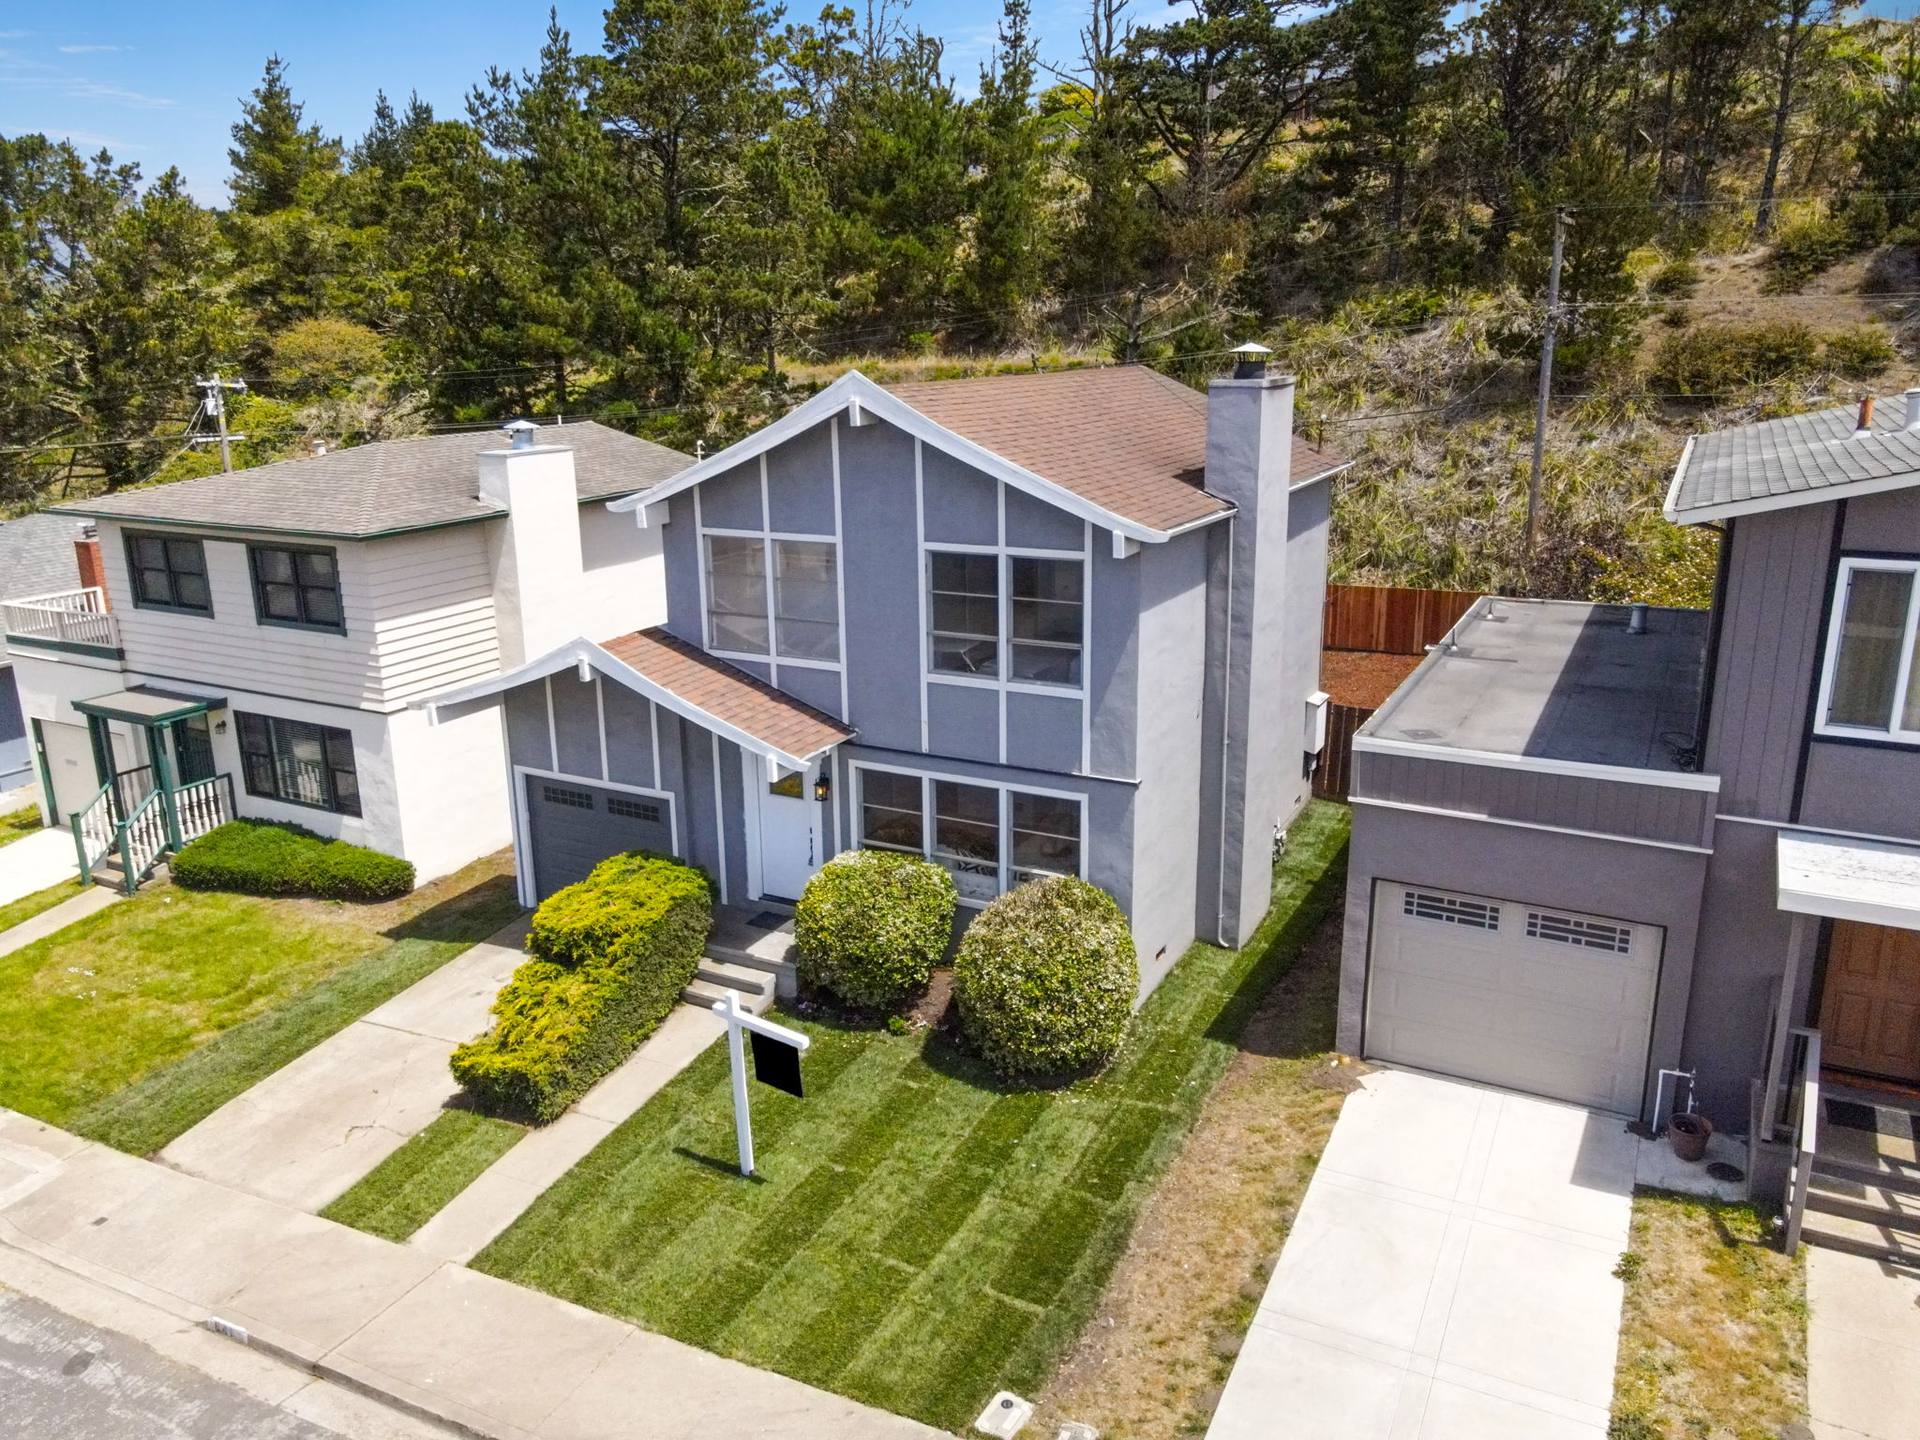  641 Foothill Dr, Pacifica, CA 94044, US